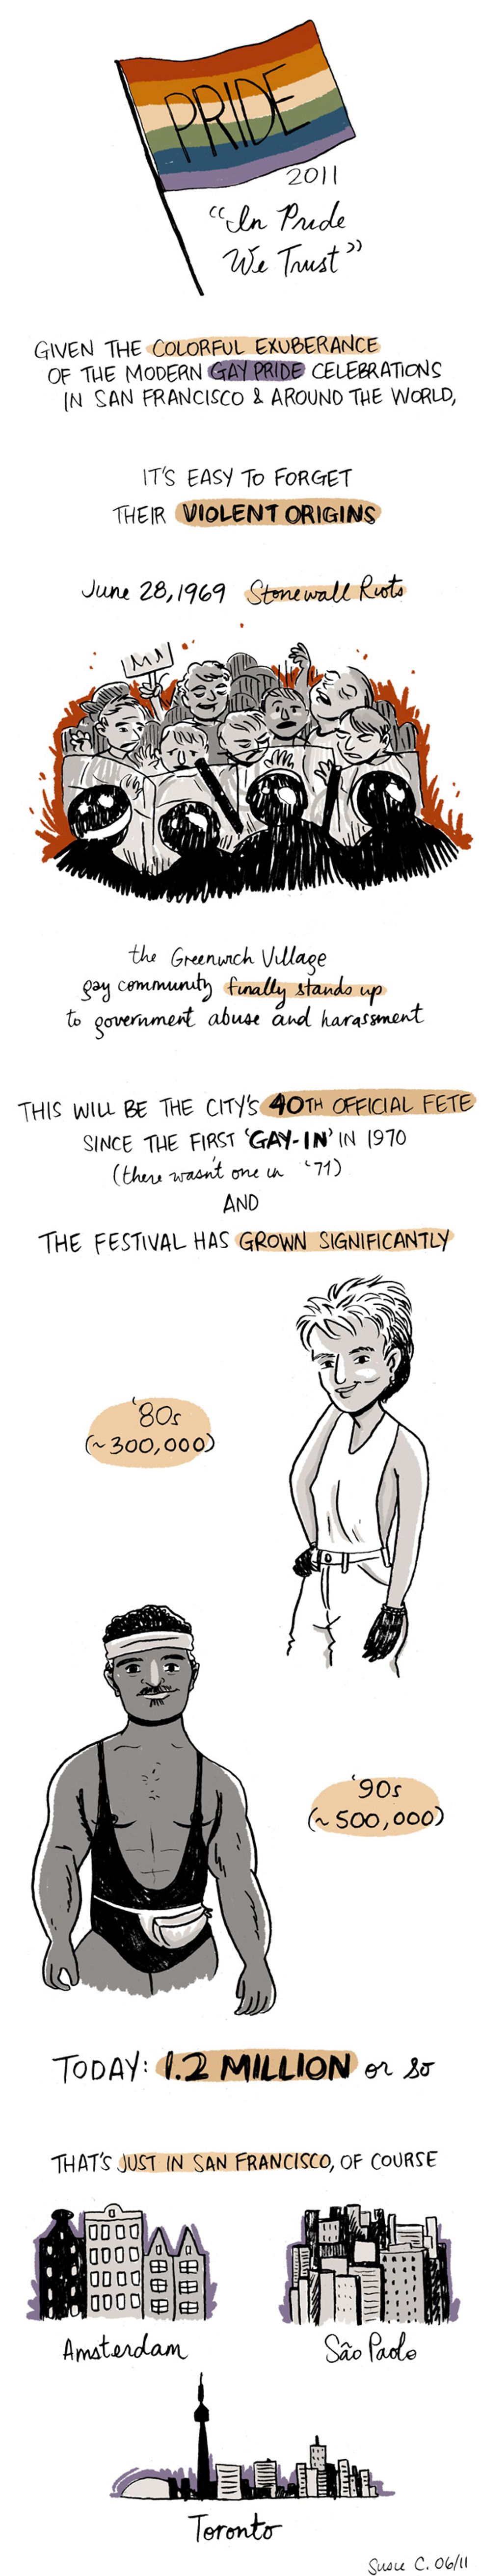 An Illustrated History of Pride